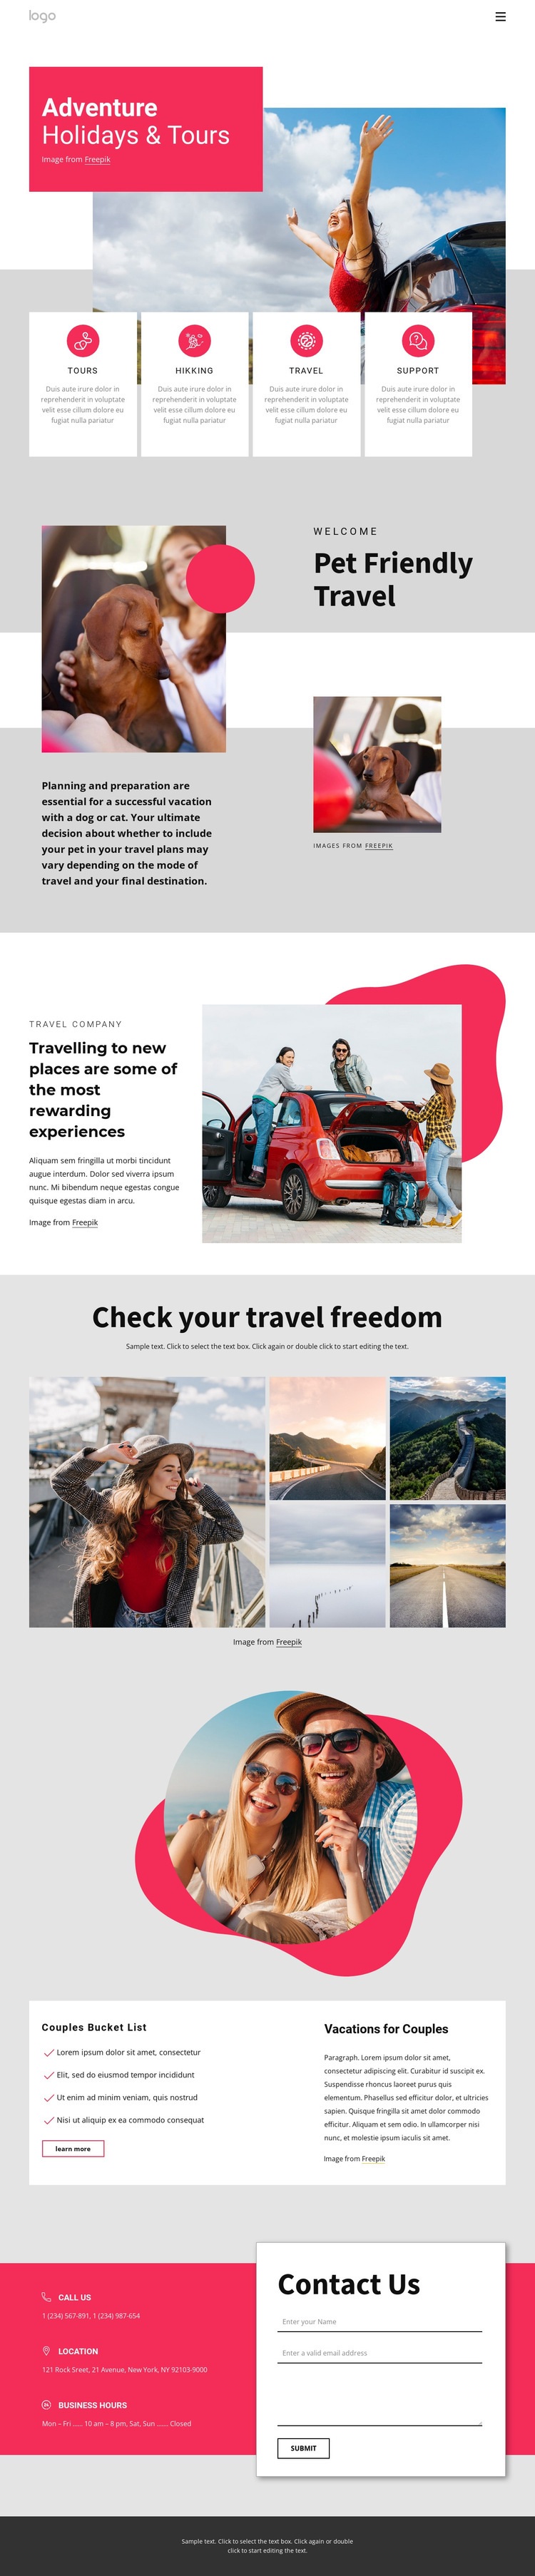 Adventure holidays and tours Wix Template Alternative